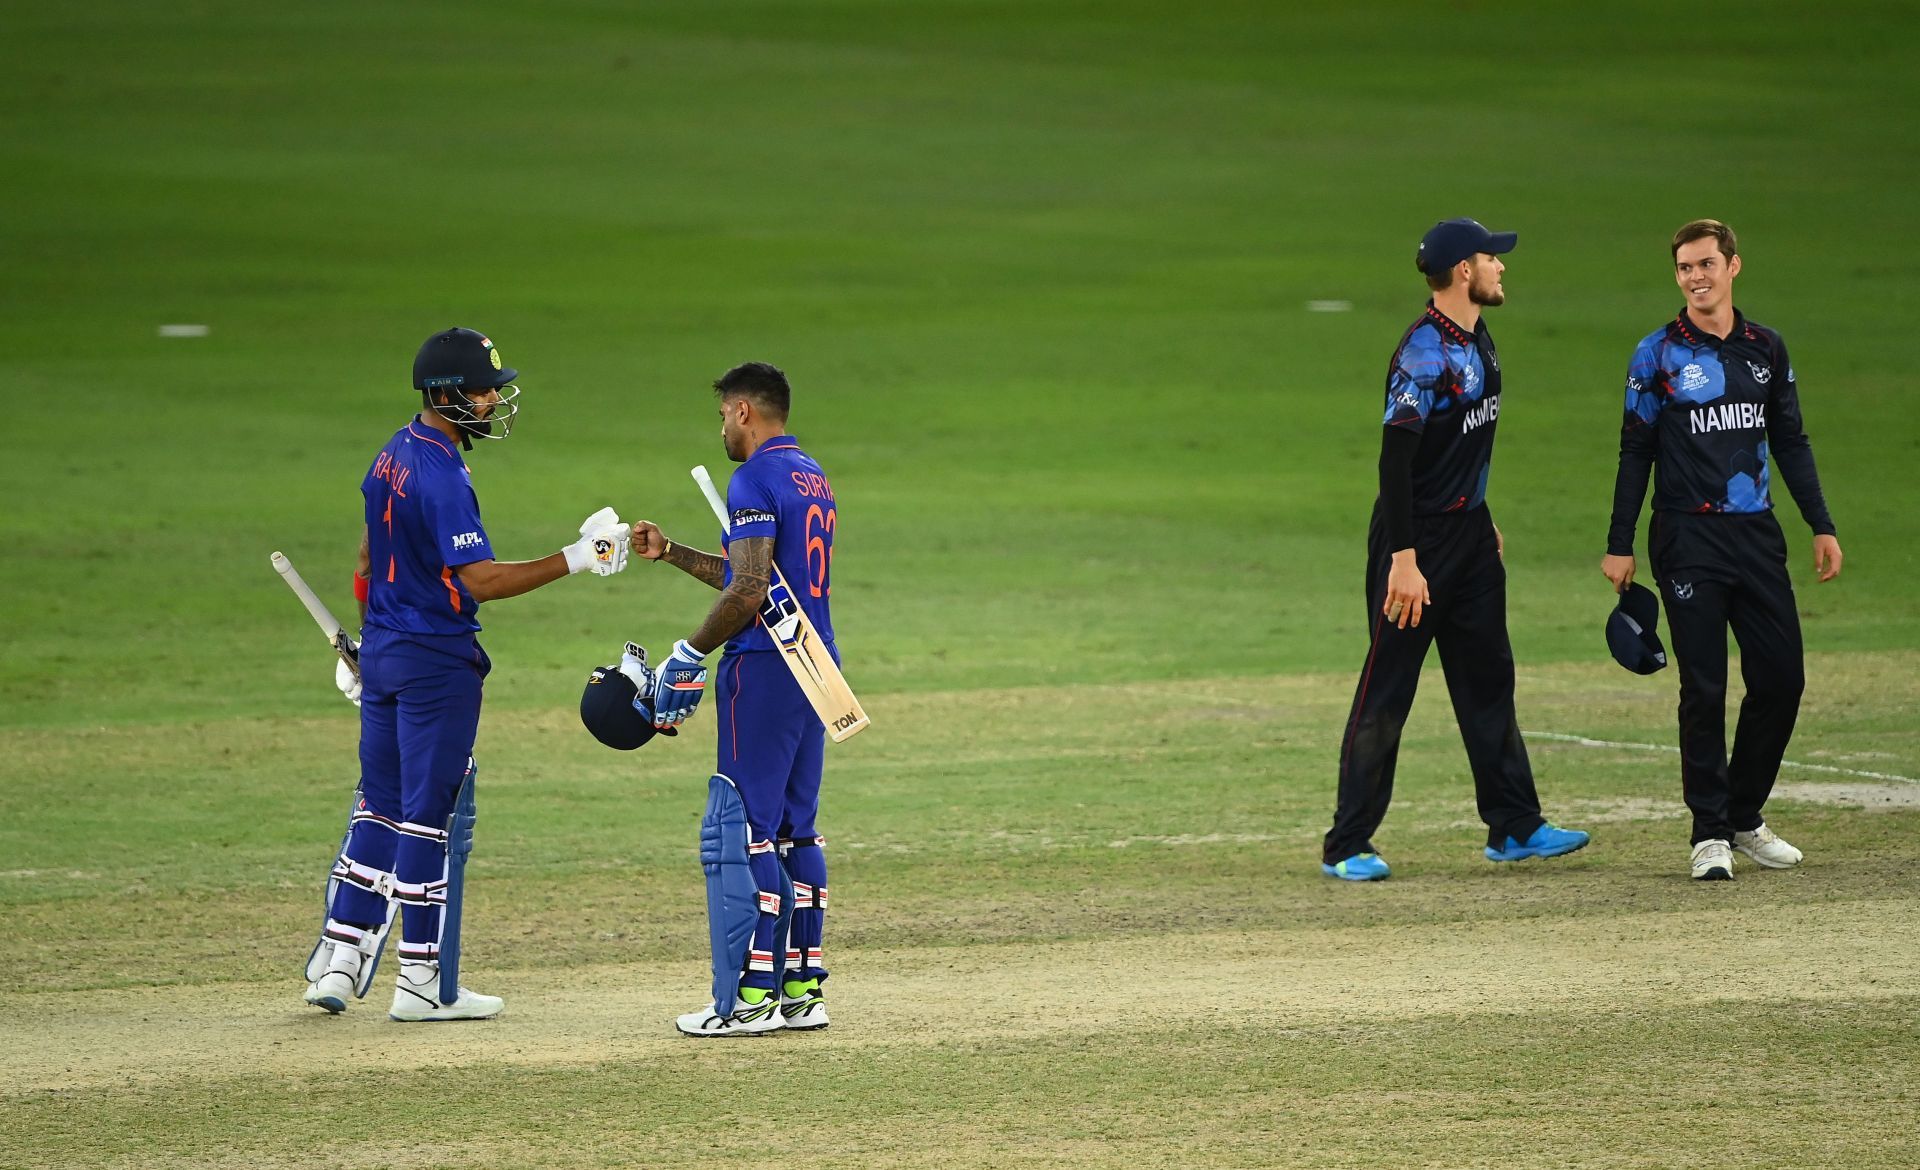 India defeated Namibia by 9 wickets in their final T20 World Cup 2021 league match